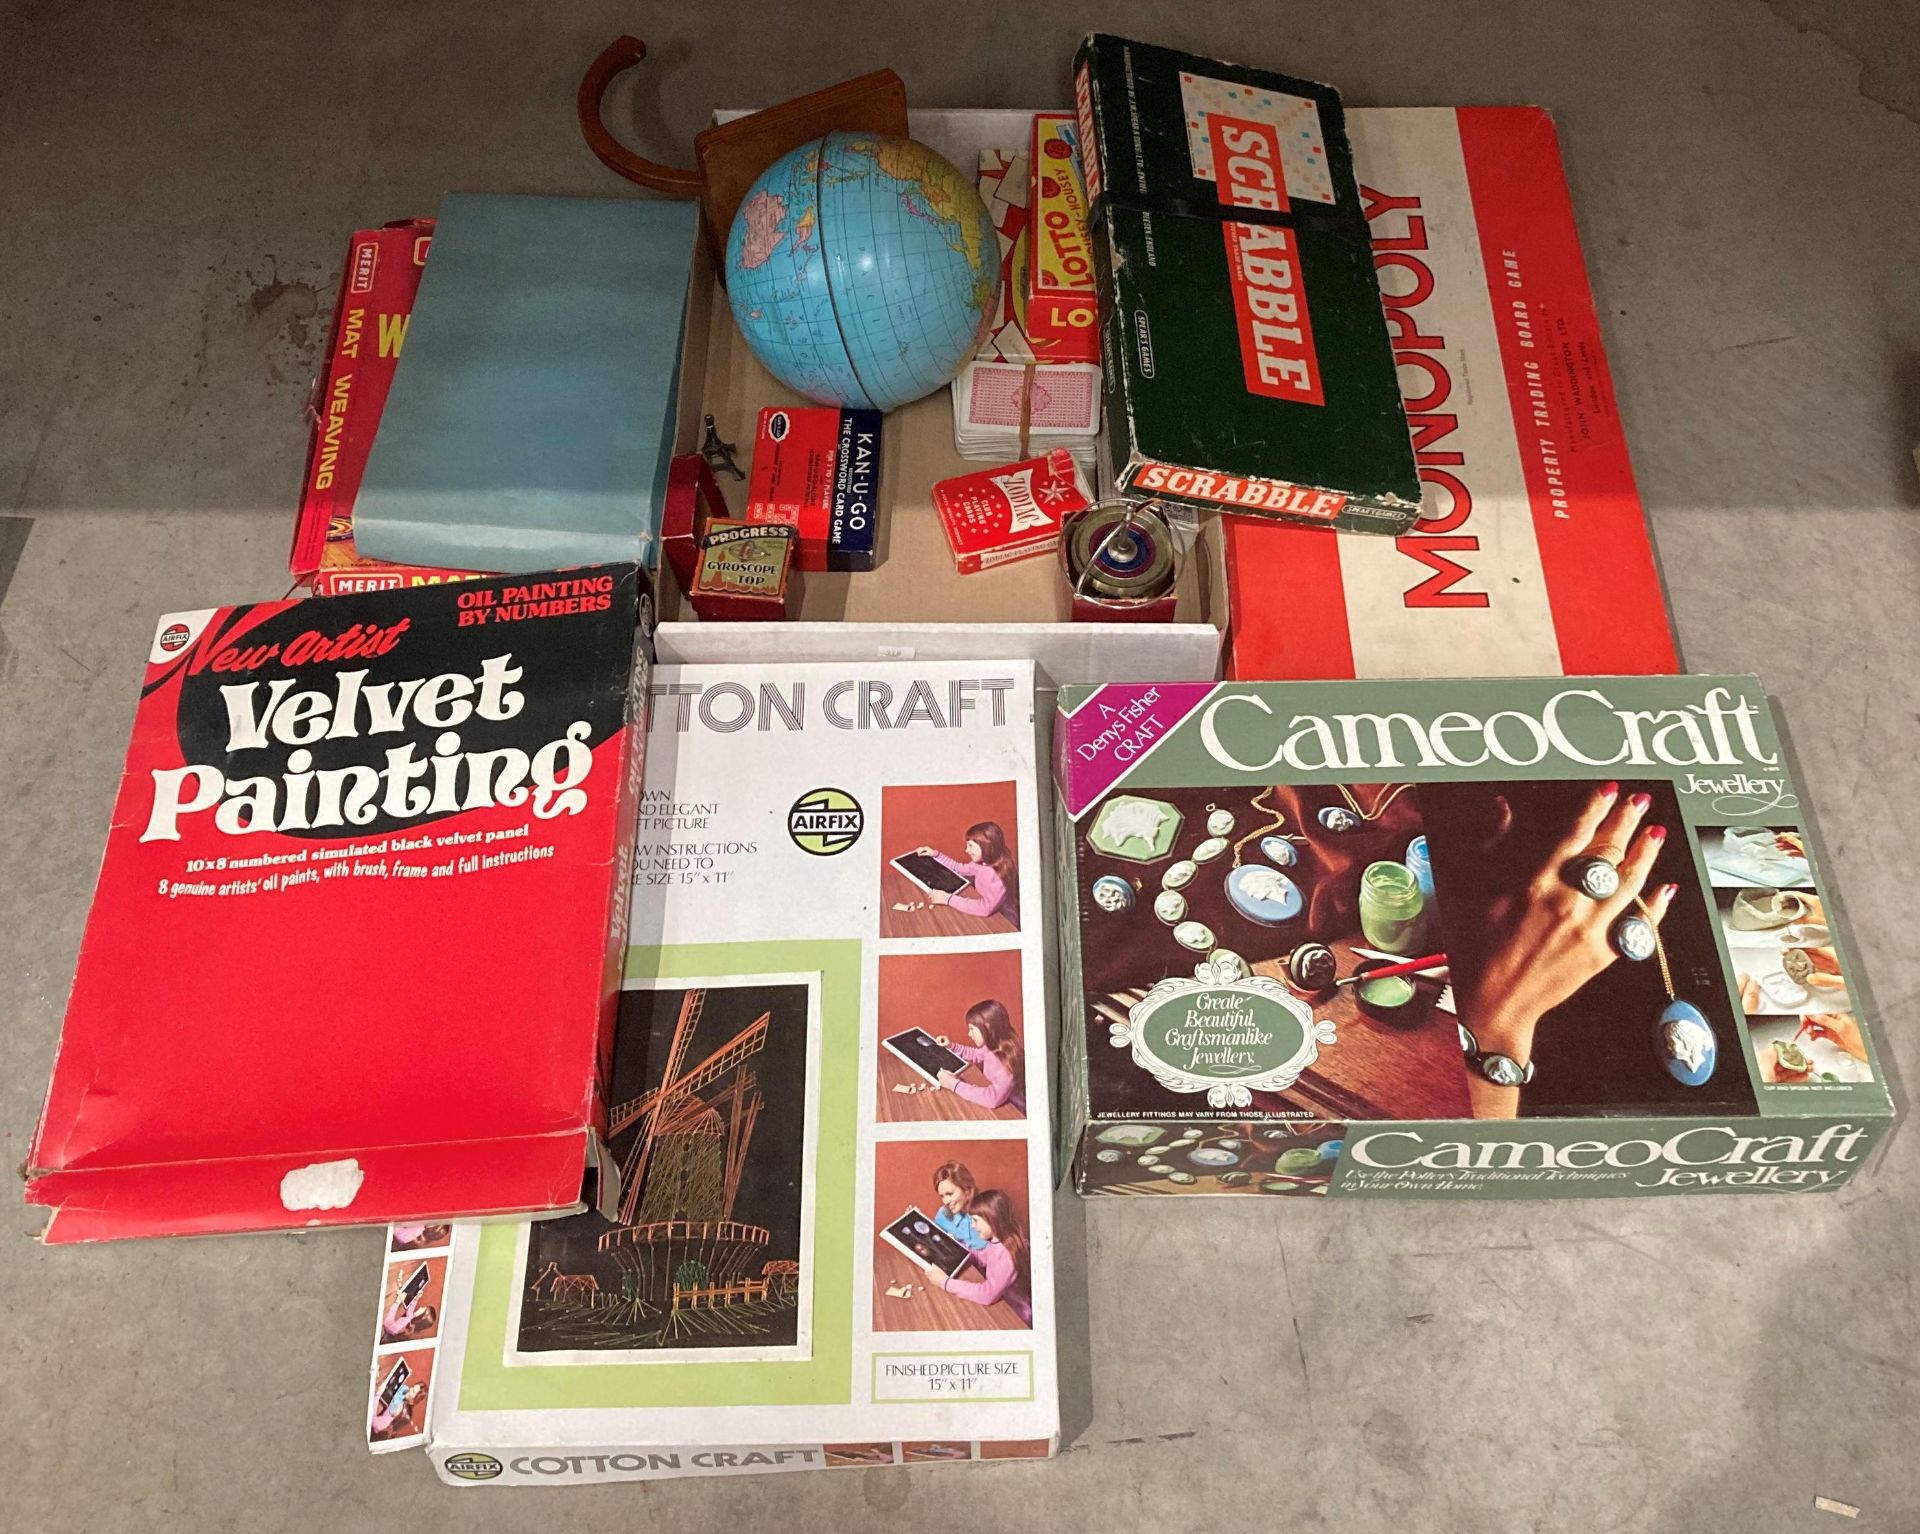 Three assorted craft sets - Cameo craft, Cotton craft, Velvet painting, Scrabble and Monopoly games,